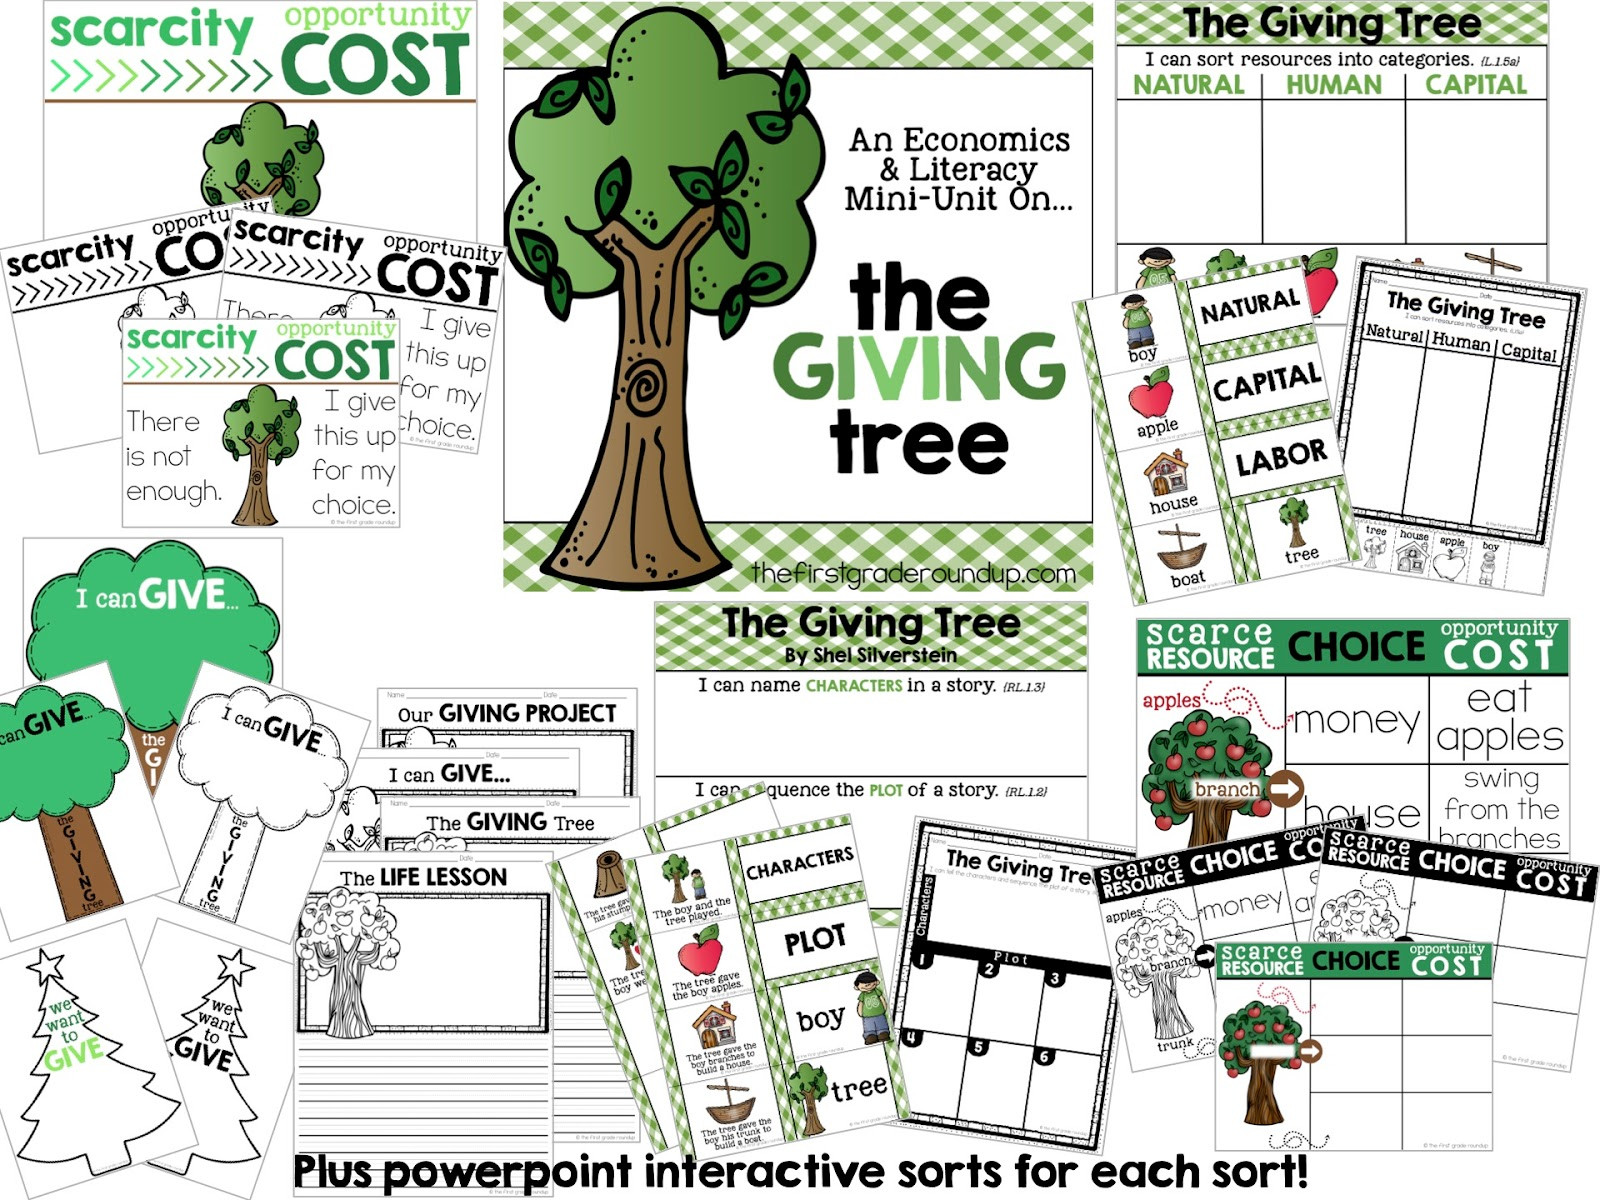 The Giving Tree Lesson Plans the Giving Tree Firstgraderoundup